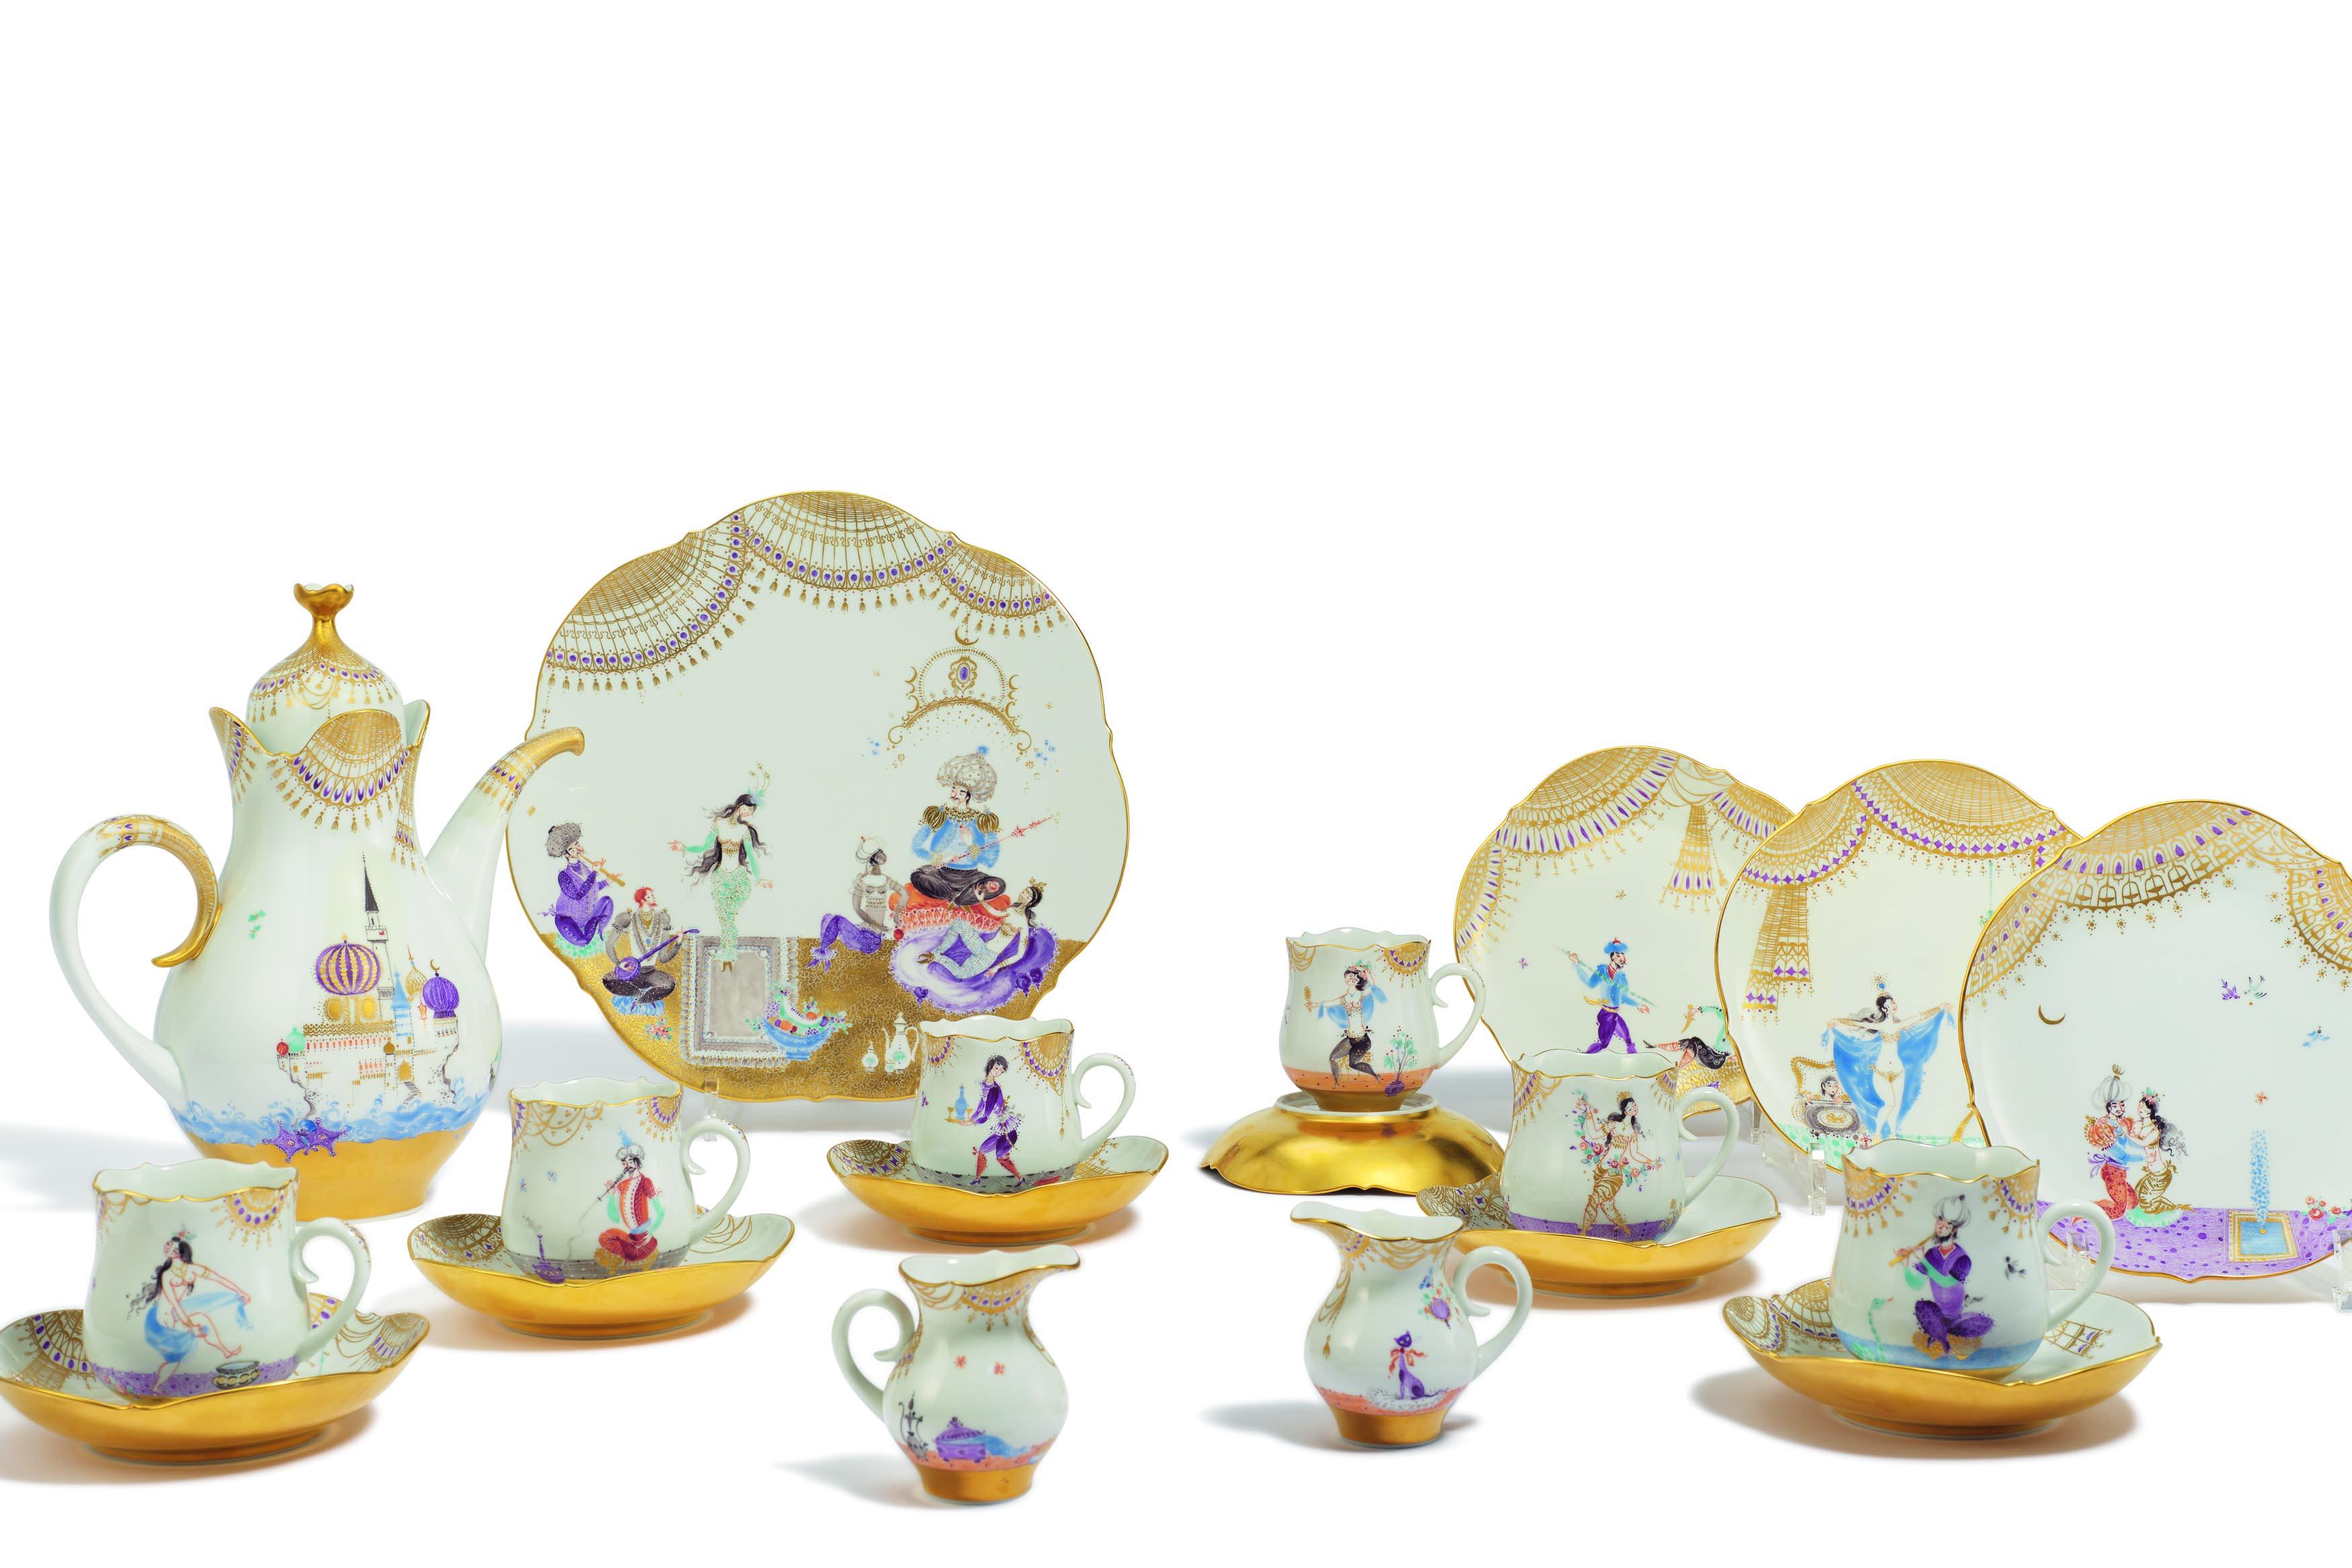 LARGE PORCELAIN COFFEE SERVICE WITH '1001 NIGHTS' DECOR FOR 12 PEOPLE